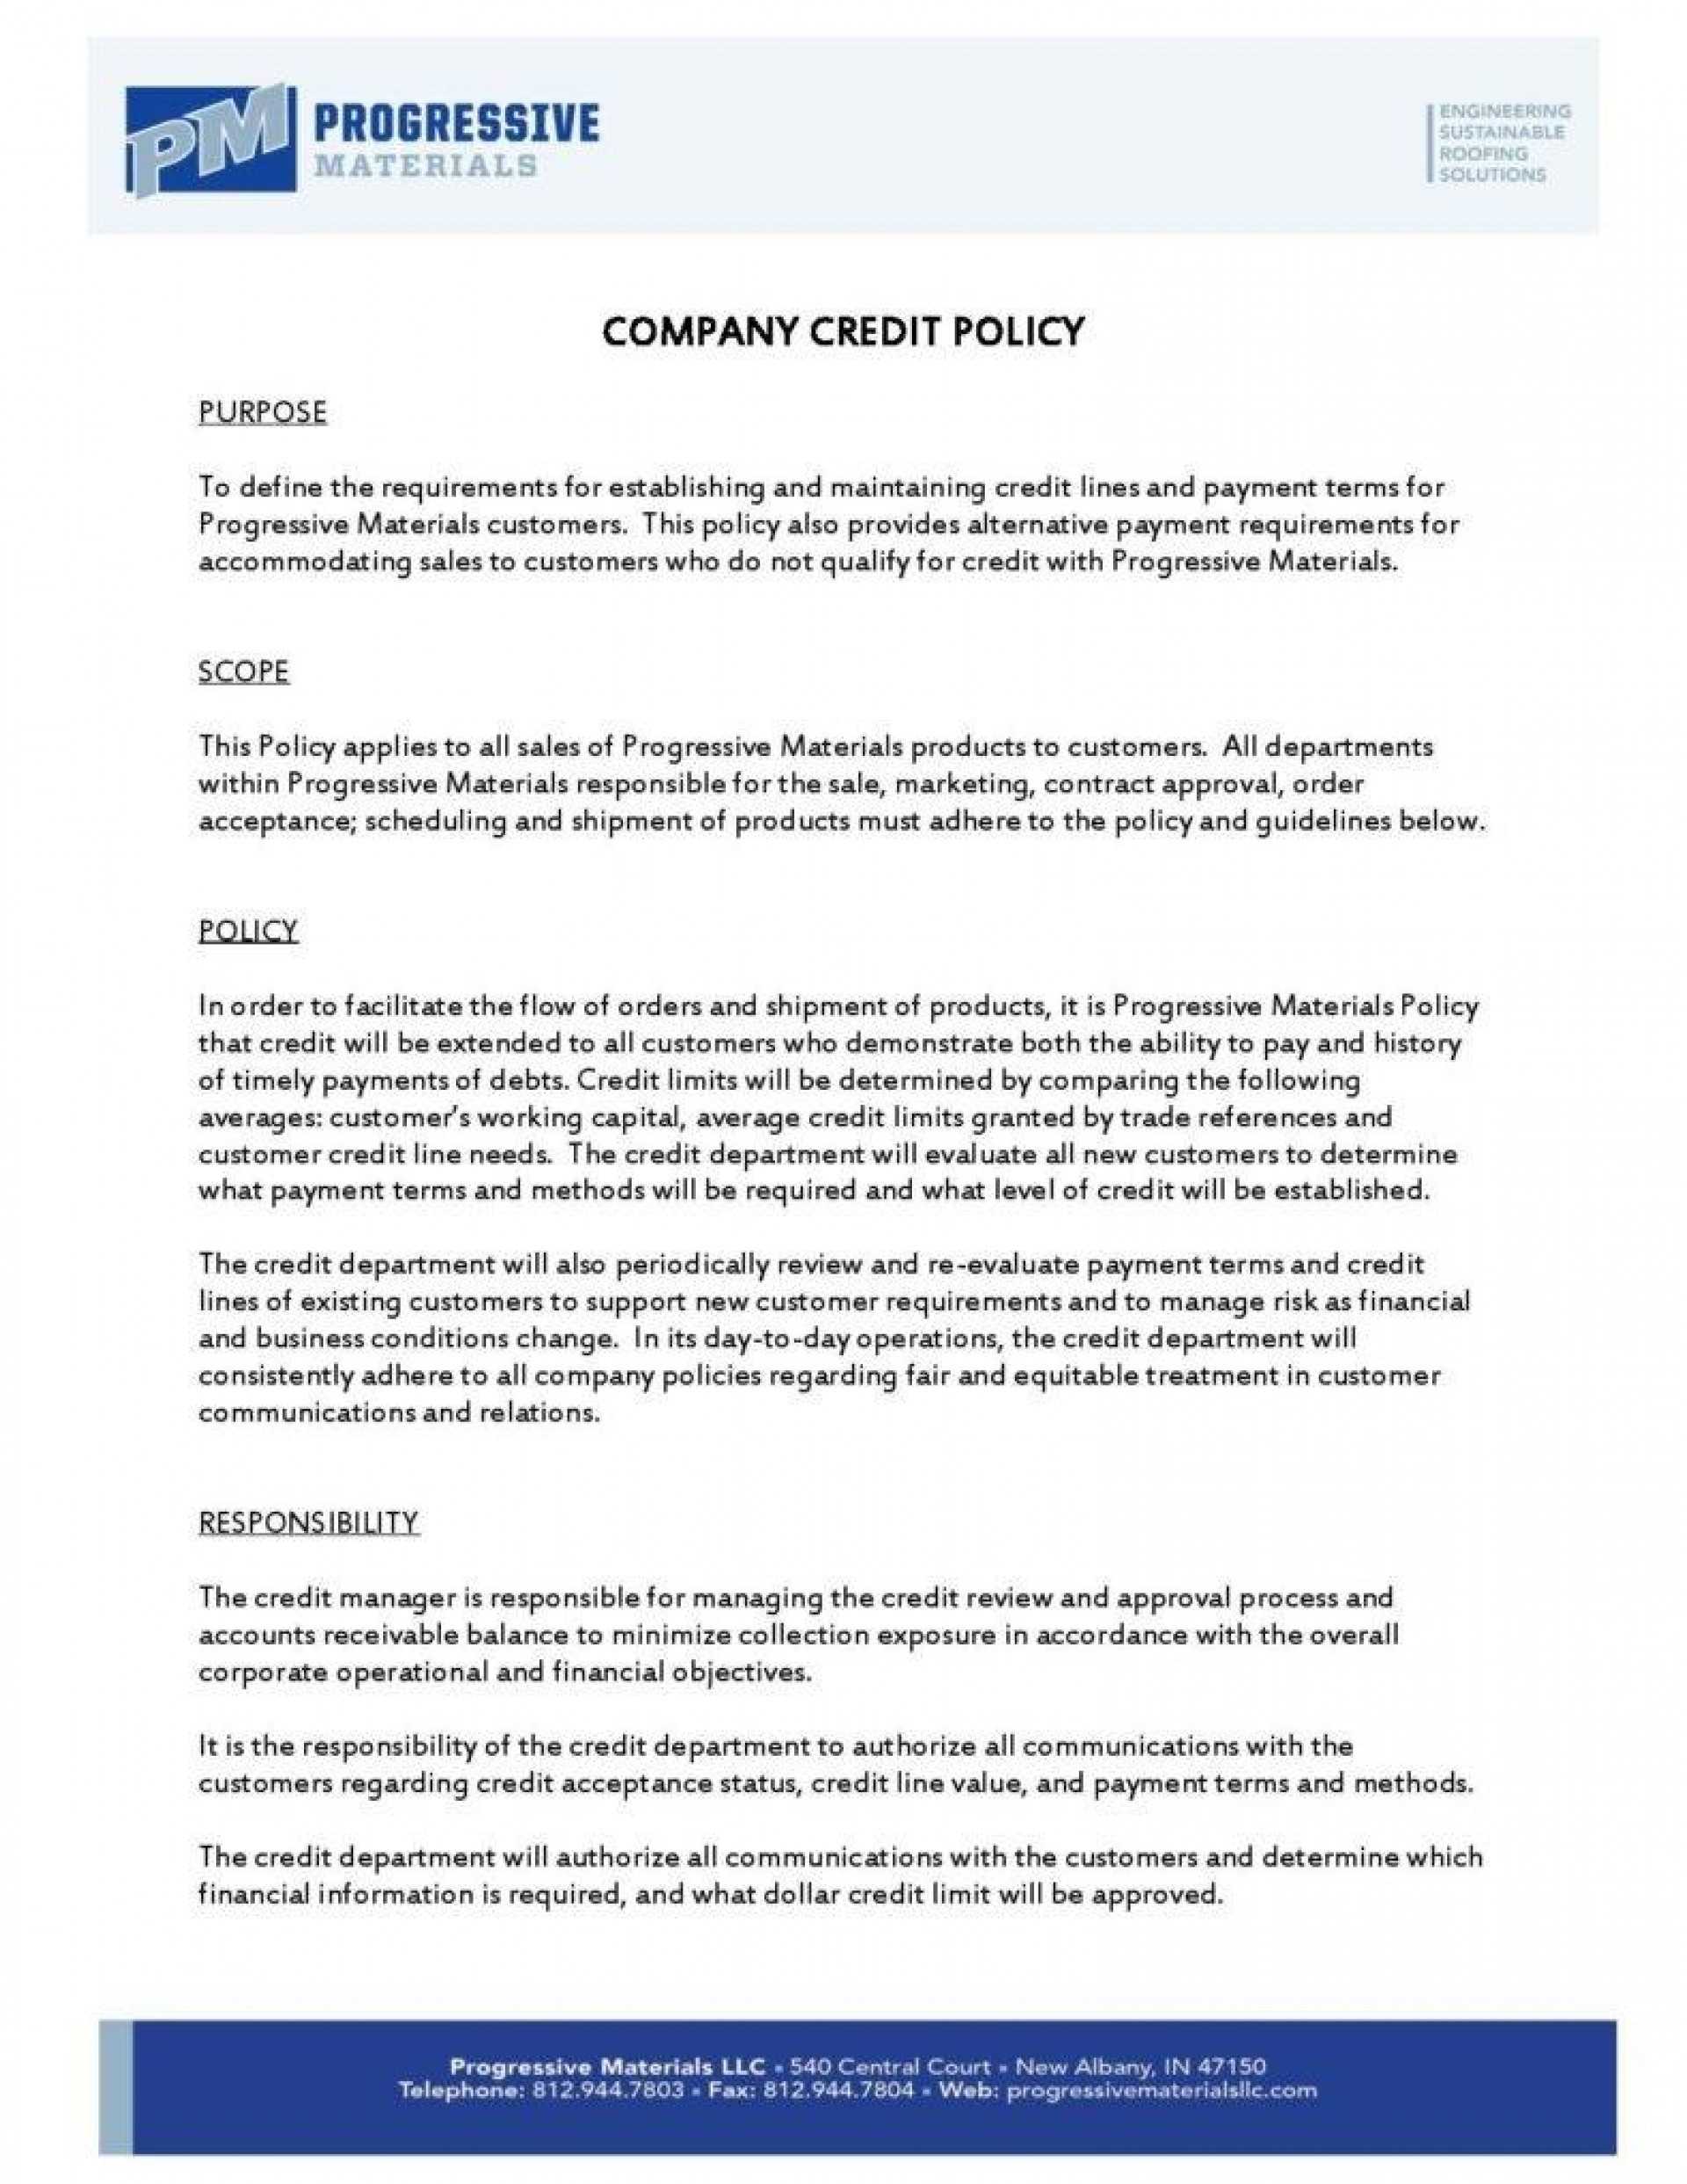 002 Template Ideas Dress Code Policy Company Credit Page Within Company Credit Card Policy Template